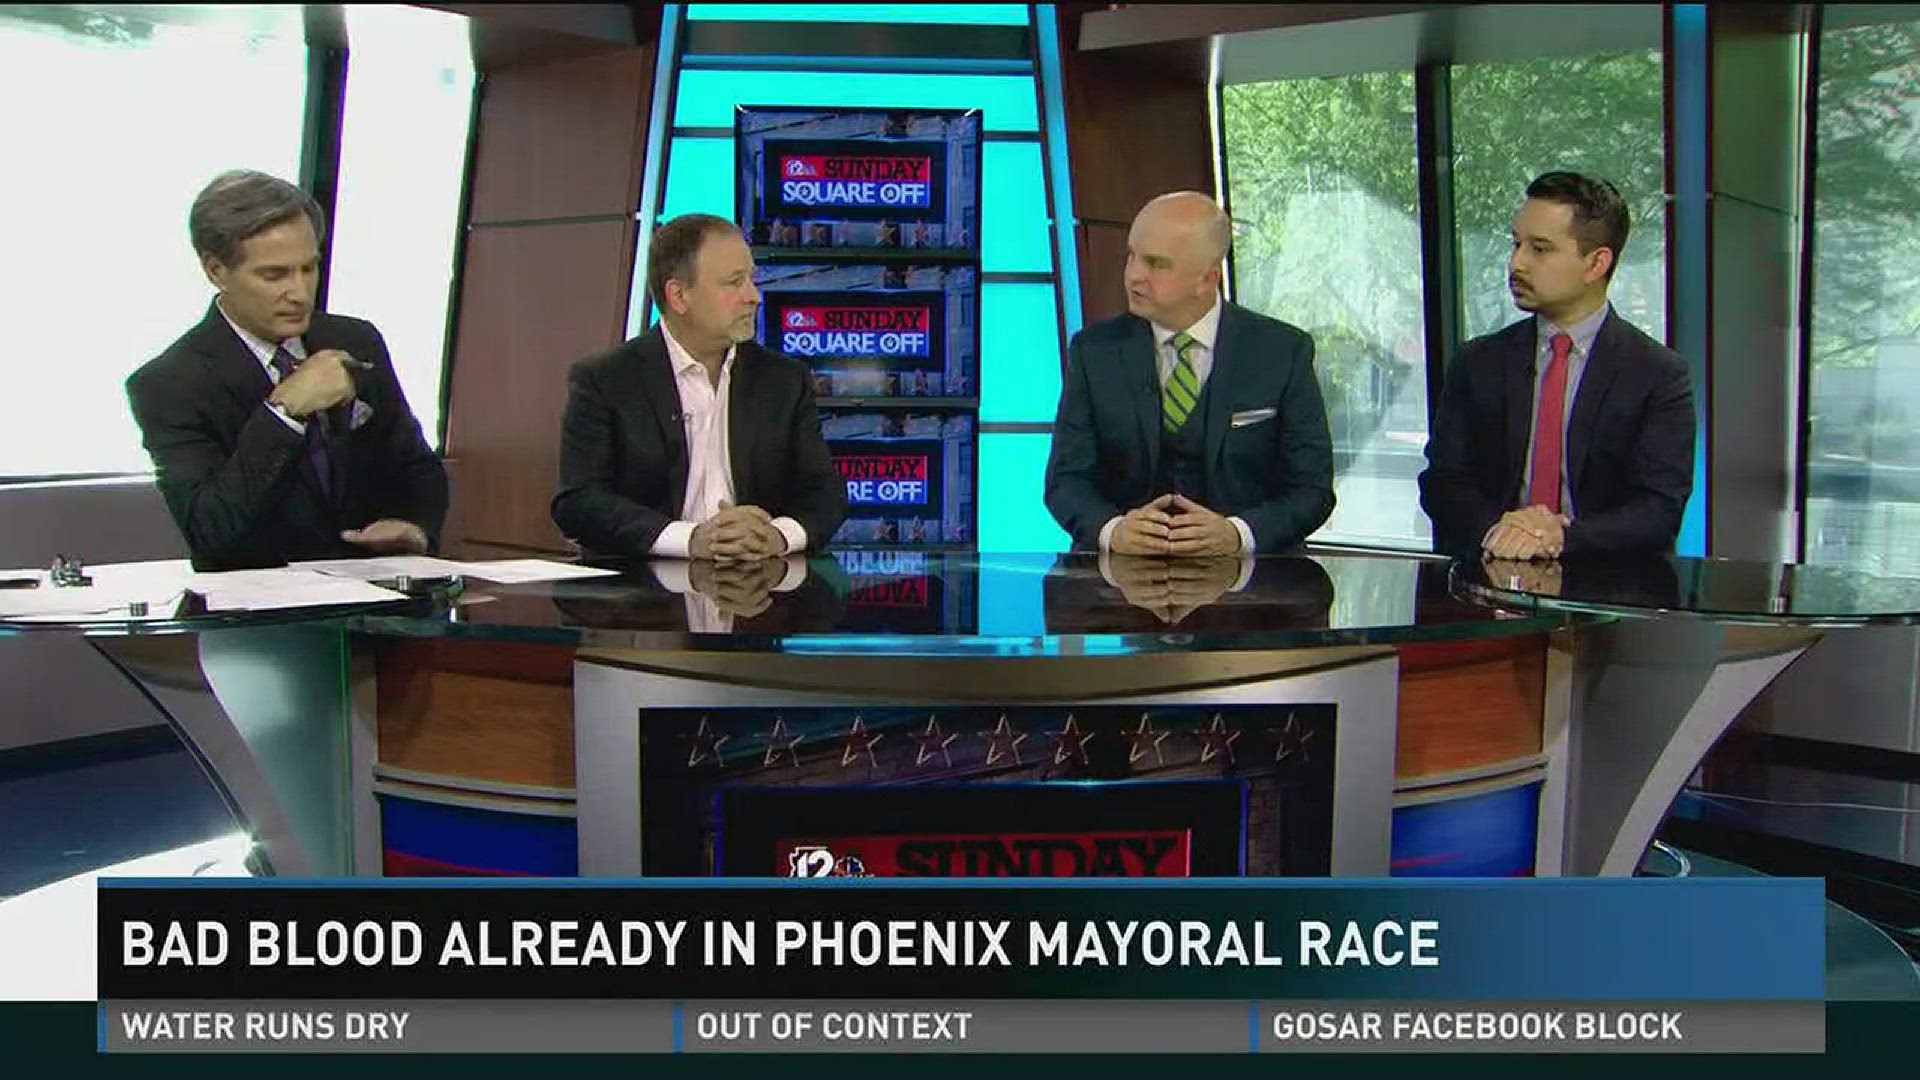 The "Sunday Square Off" panel debates whether this is the right time for a conservative to run for Phoenix mayor.